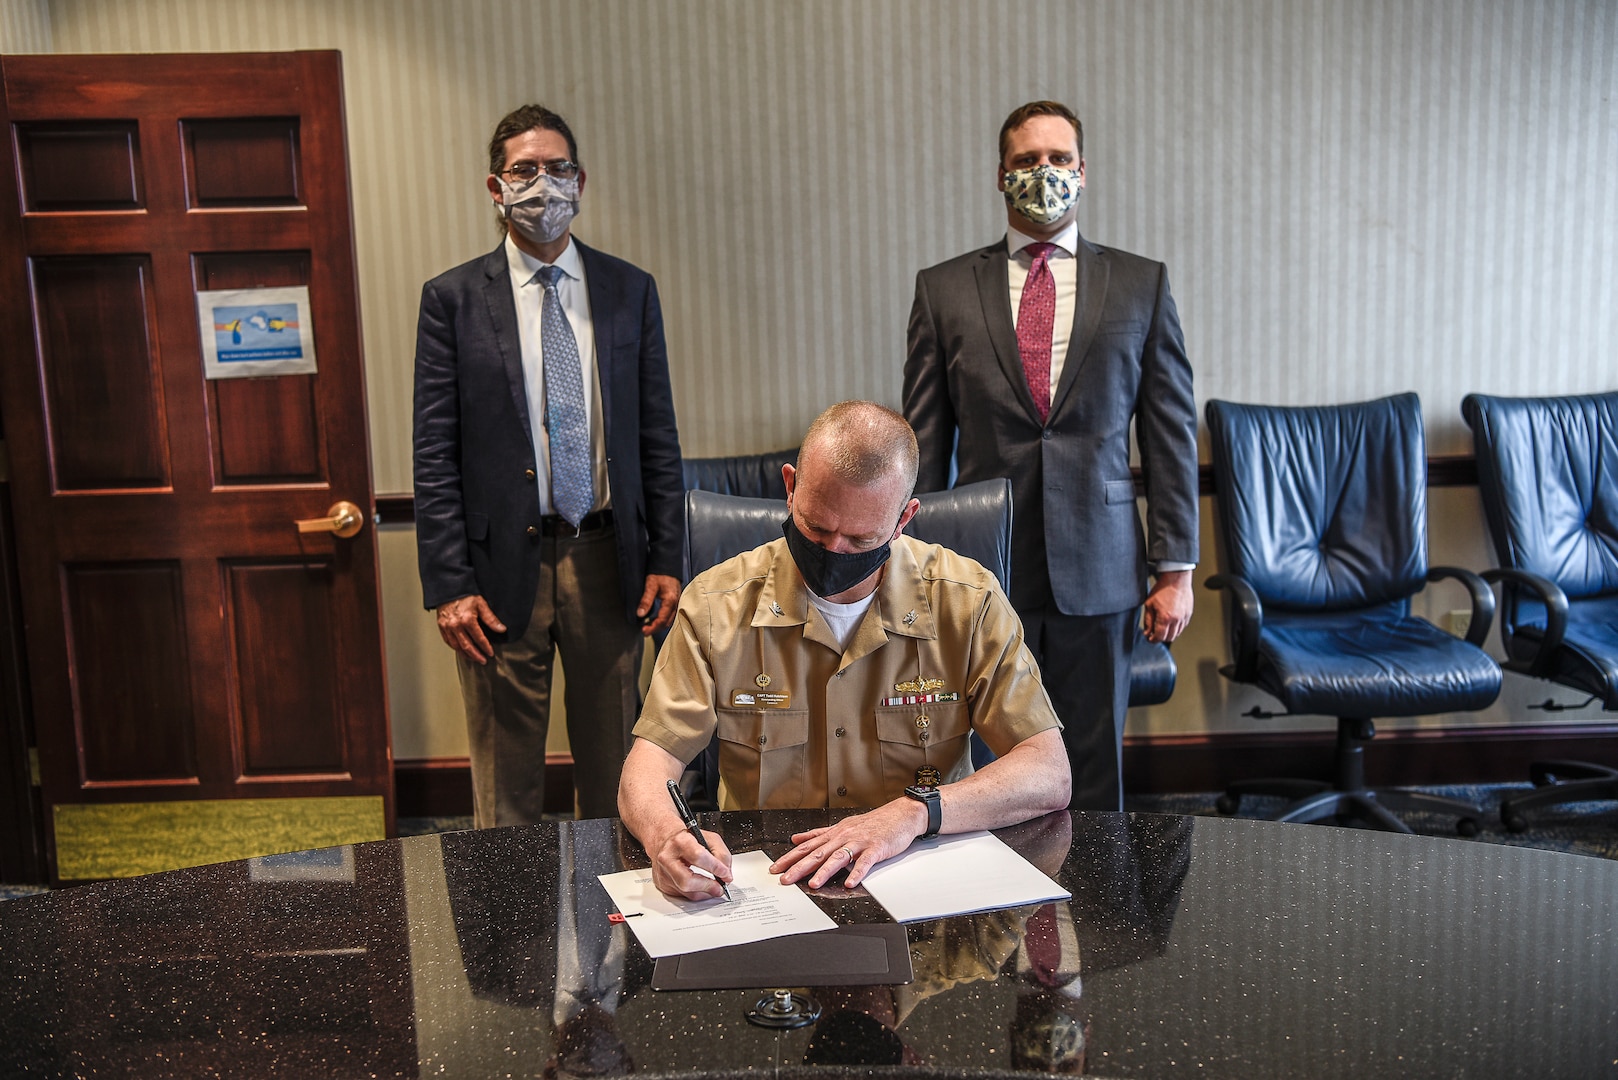 Capt. Todd Hutchison signs a Cooperative Research and Development Agreement (CRADA) between Naval Surface Warfare Center, Carderock Division (NSWCCD) and Thermal Compaction Group (TCG) on April 29, 2021.